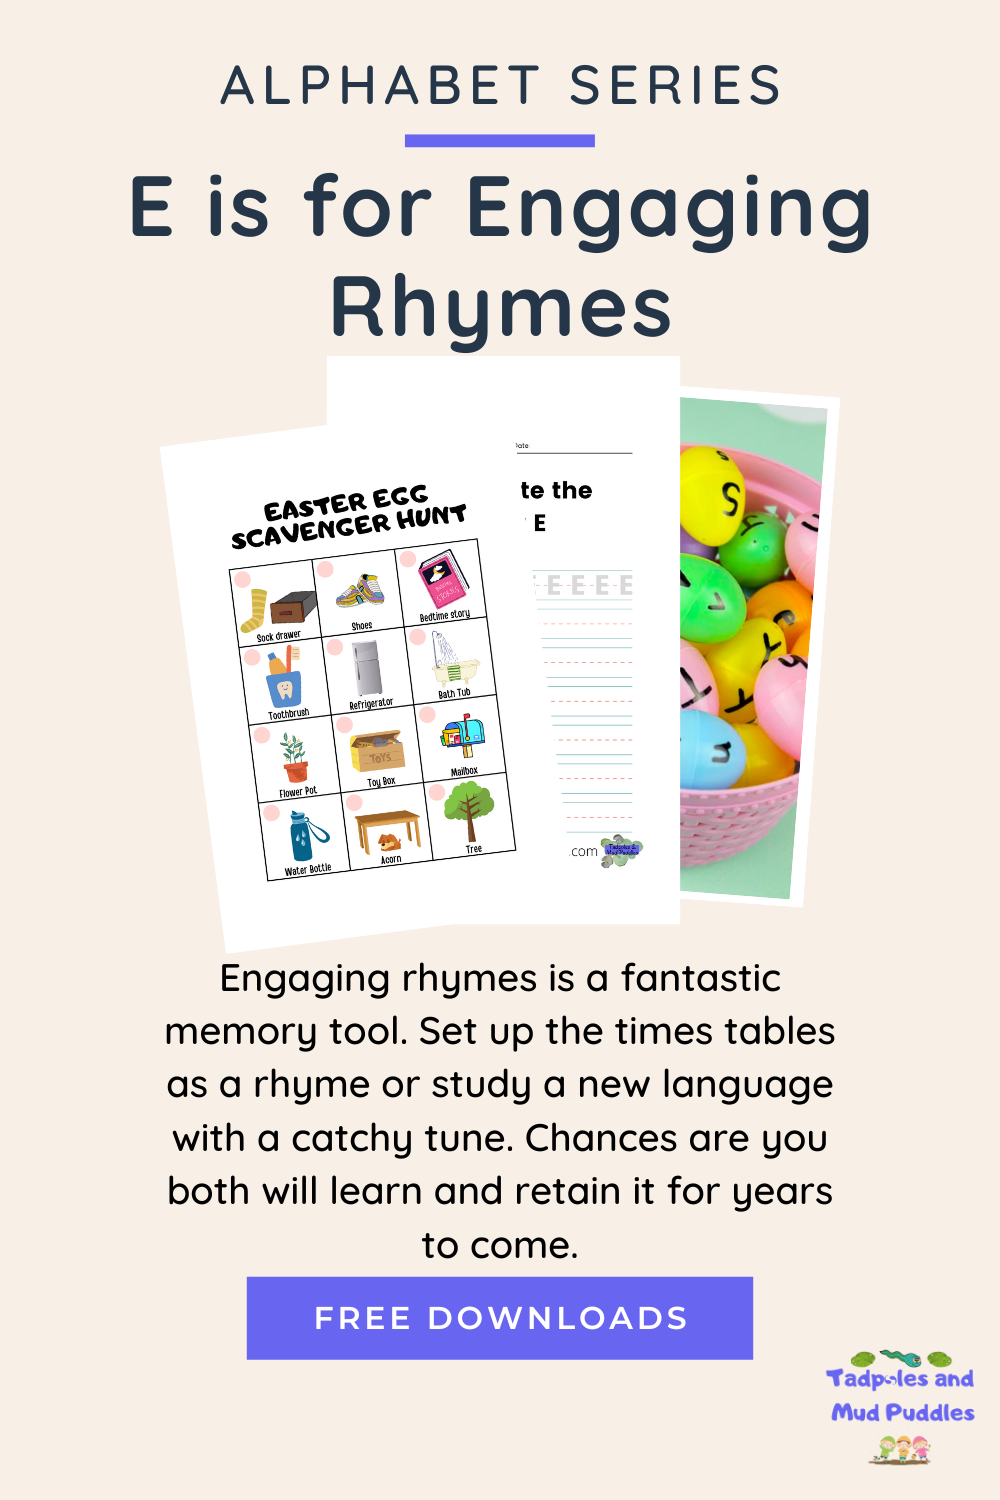 E is for engaging rhymes pin